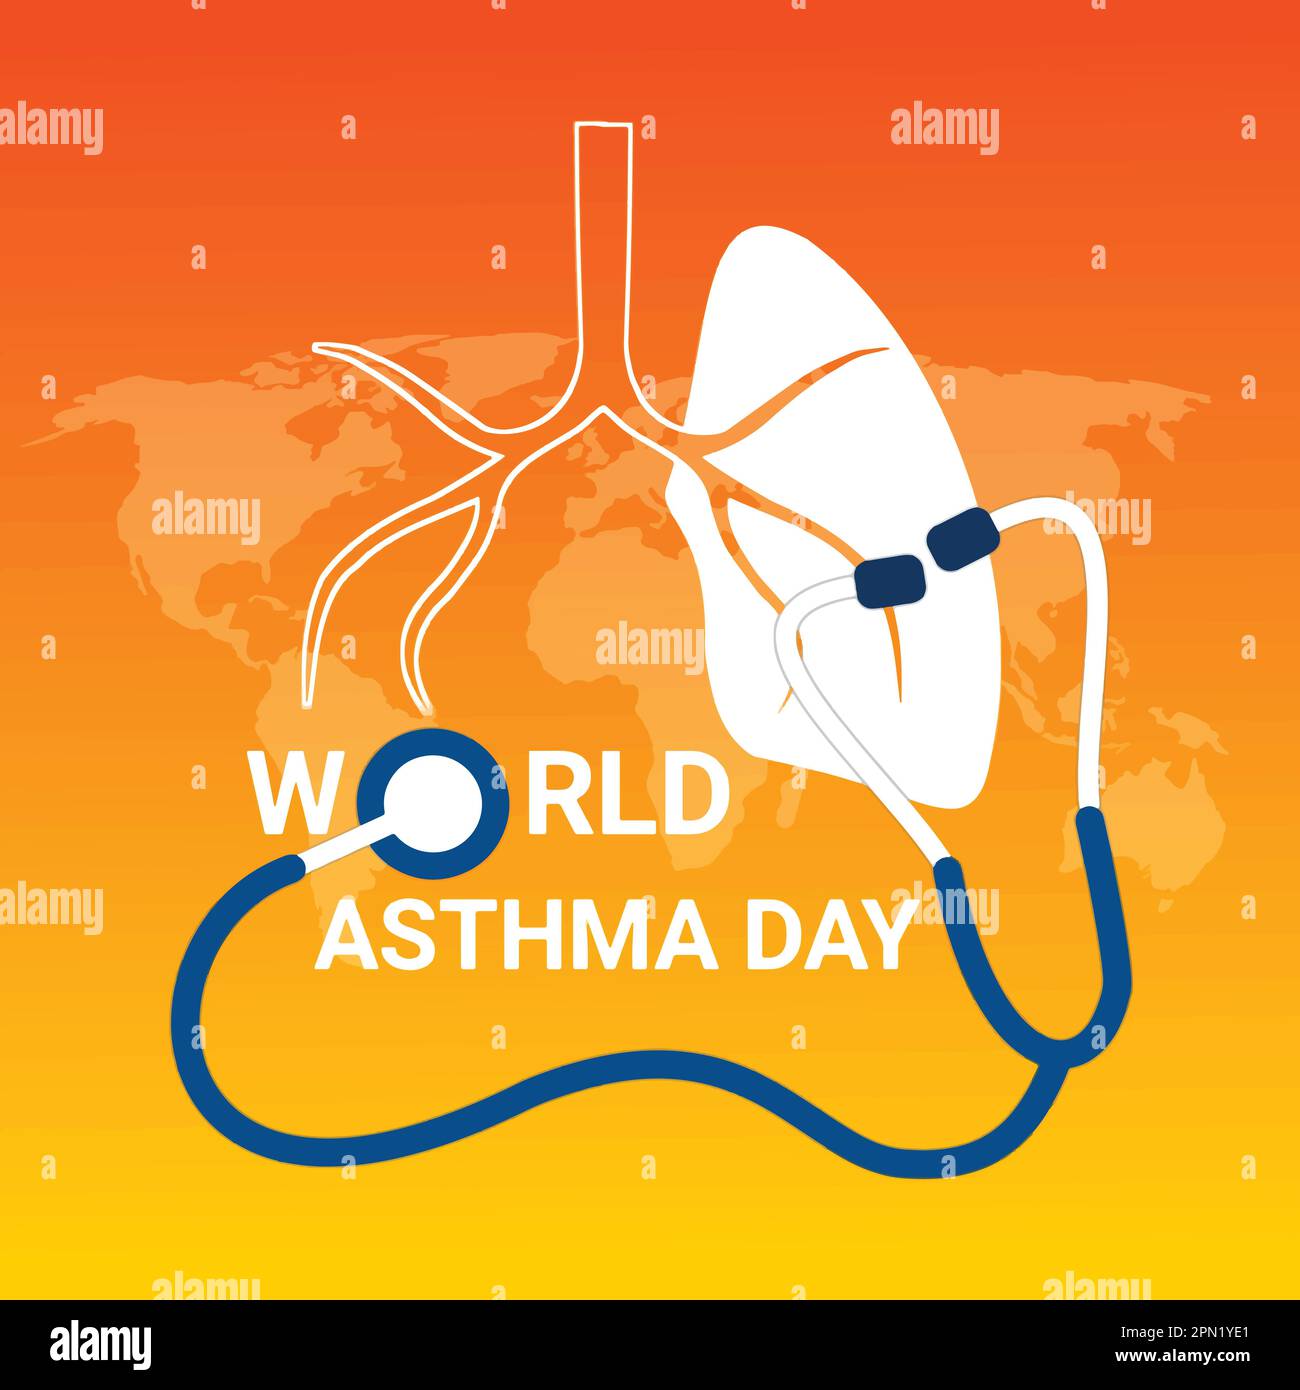 World Asthma Day. Vector illustration with lungs and stethoscope. Design element for poster, card, banner. Stock Vector